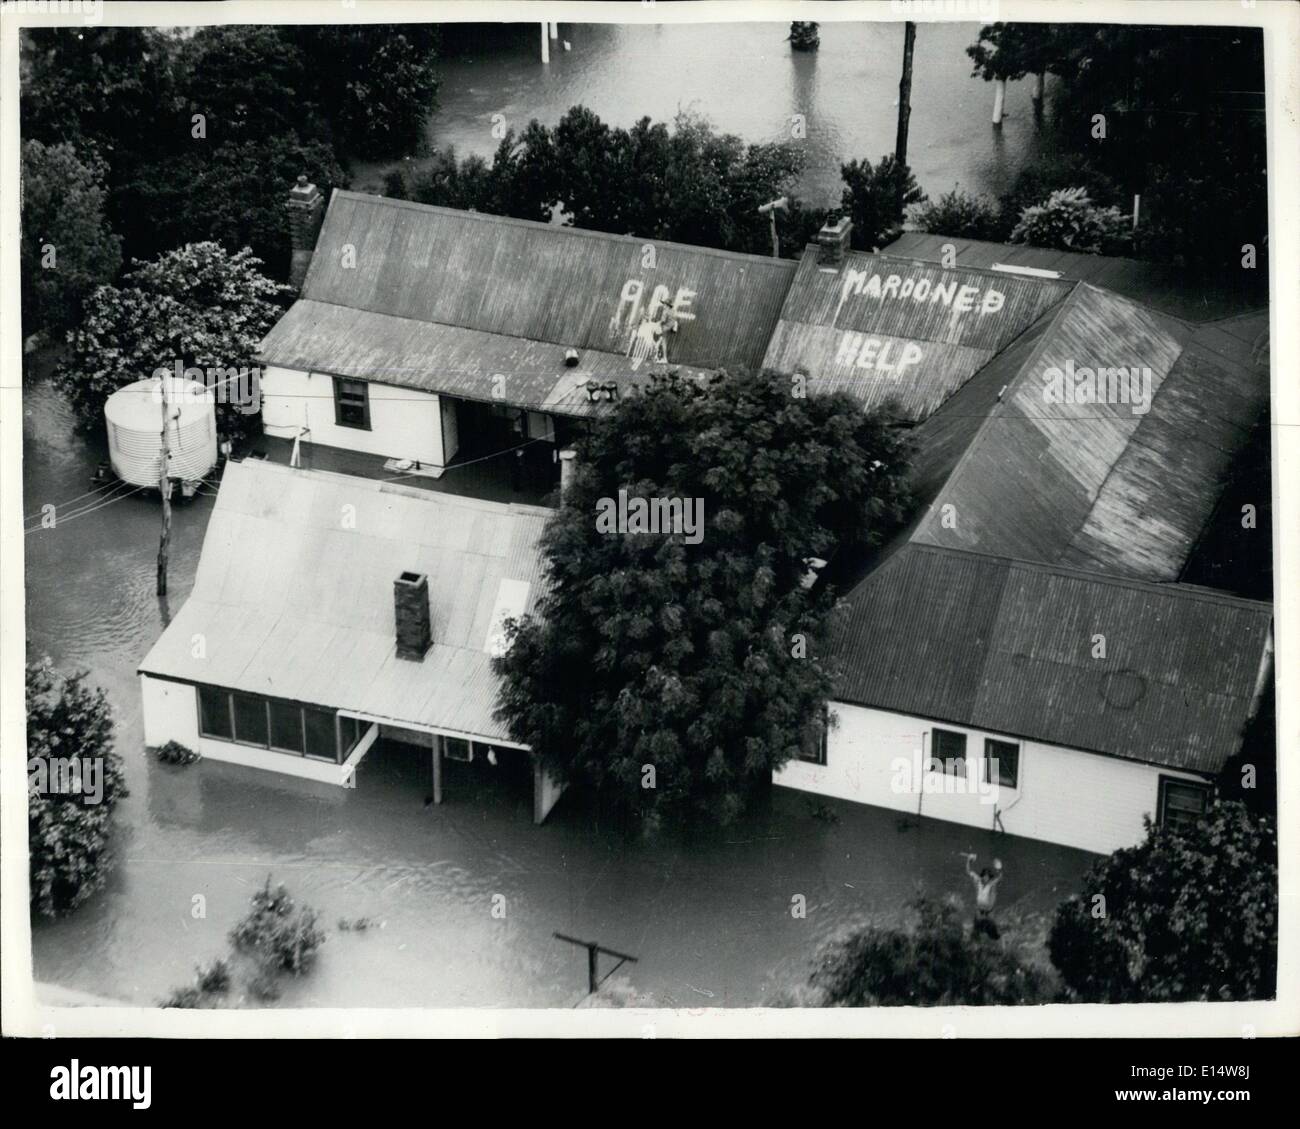 Apr. 18, 2012 - SEVERE FLOODS IN NEW SOUTH WALES: Widespread floods in New South Wales have rendered many thousands homeless - and this aerial view showing an S.O.S. for help painted on the roof of one of the many marooned dwellings. Stock Photo